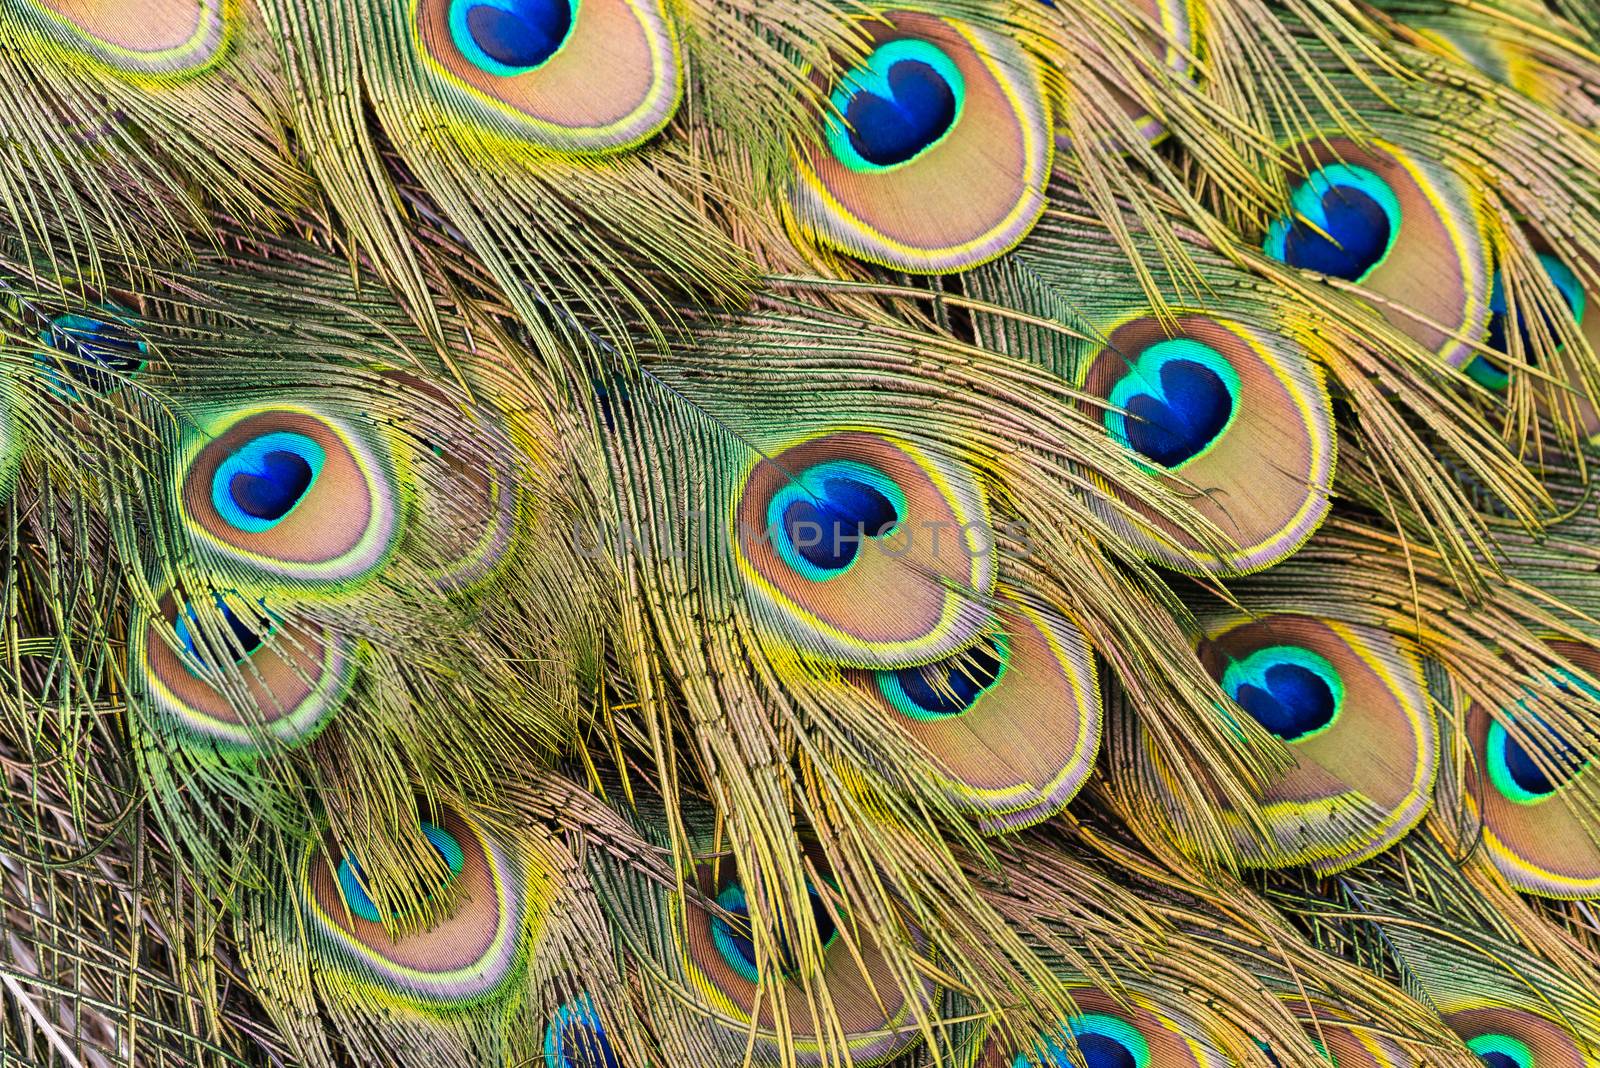 A close up of eyespots on the tail feathers of a male peacock.